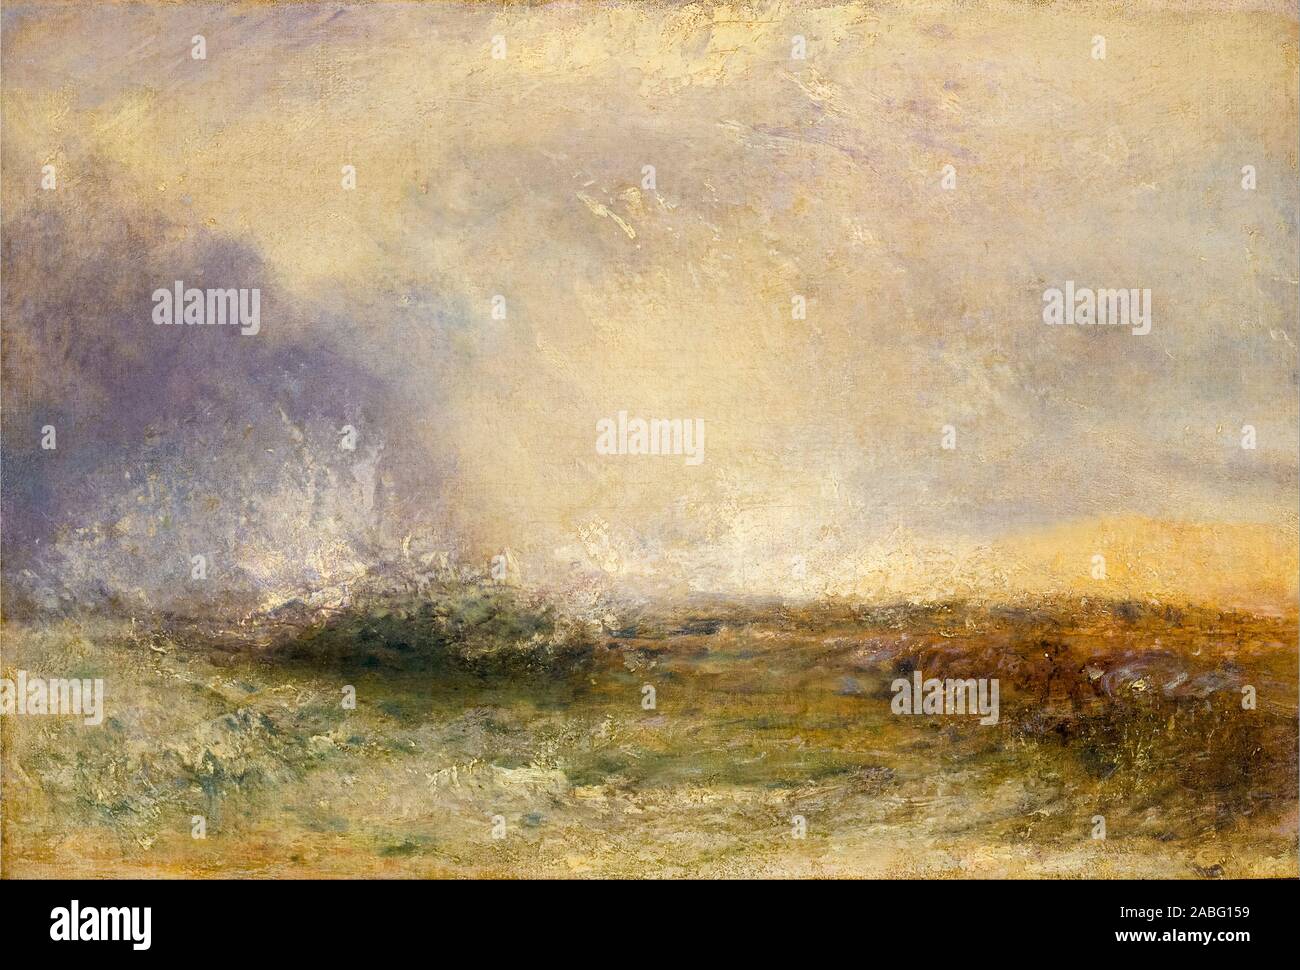 JMW Turner, Stormy Sea Breaking on a Shore, landscape painting, 1840-1845 Stock Photo